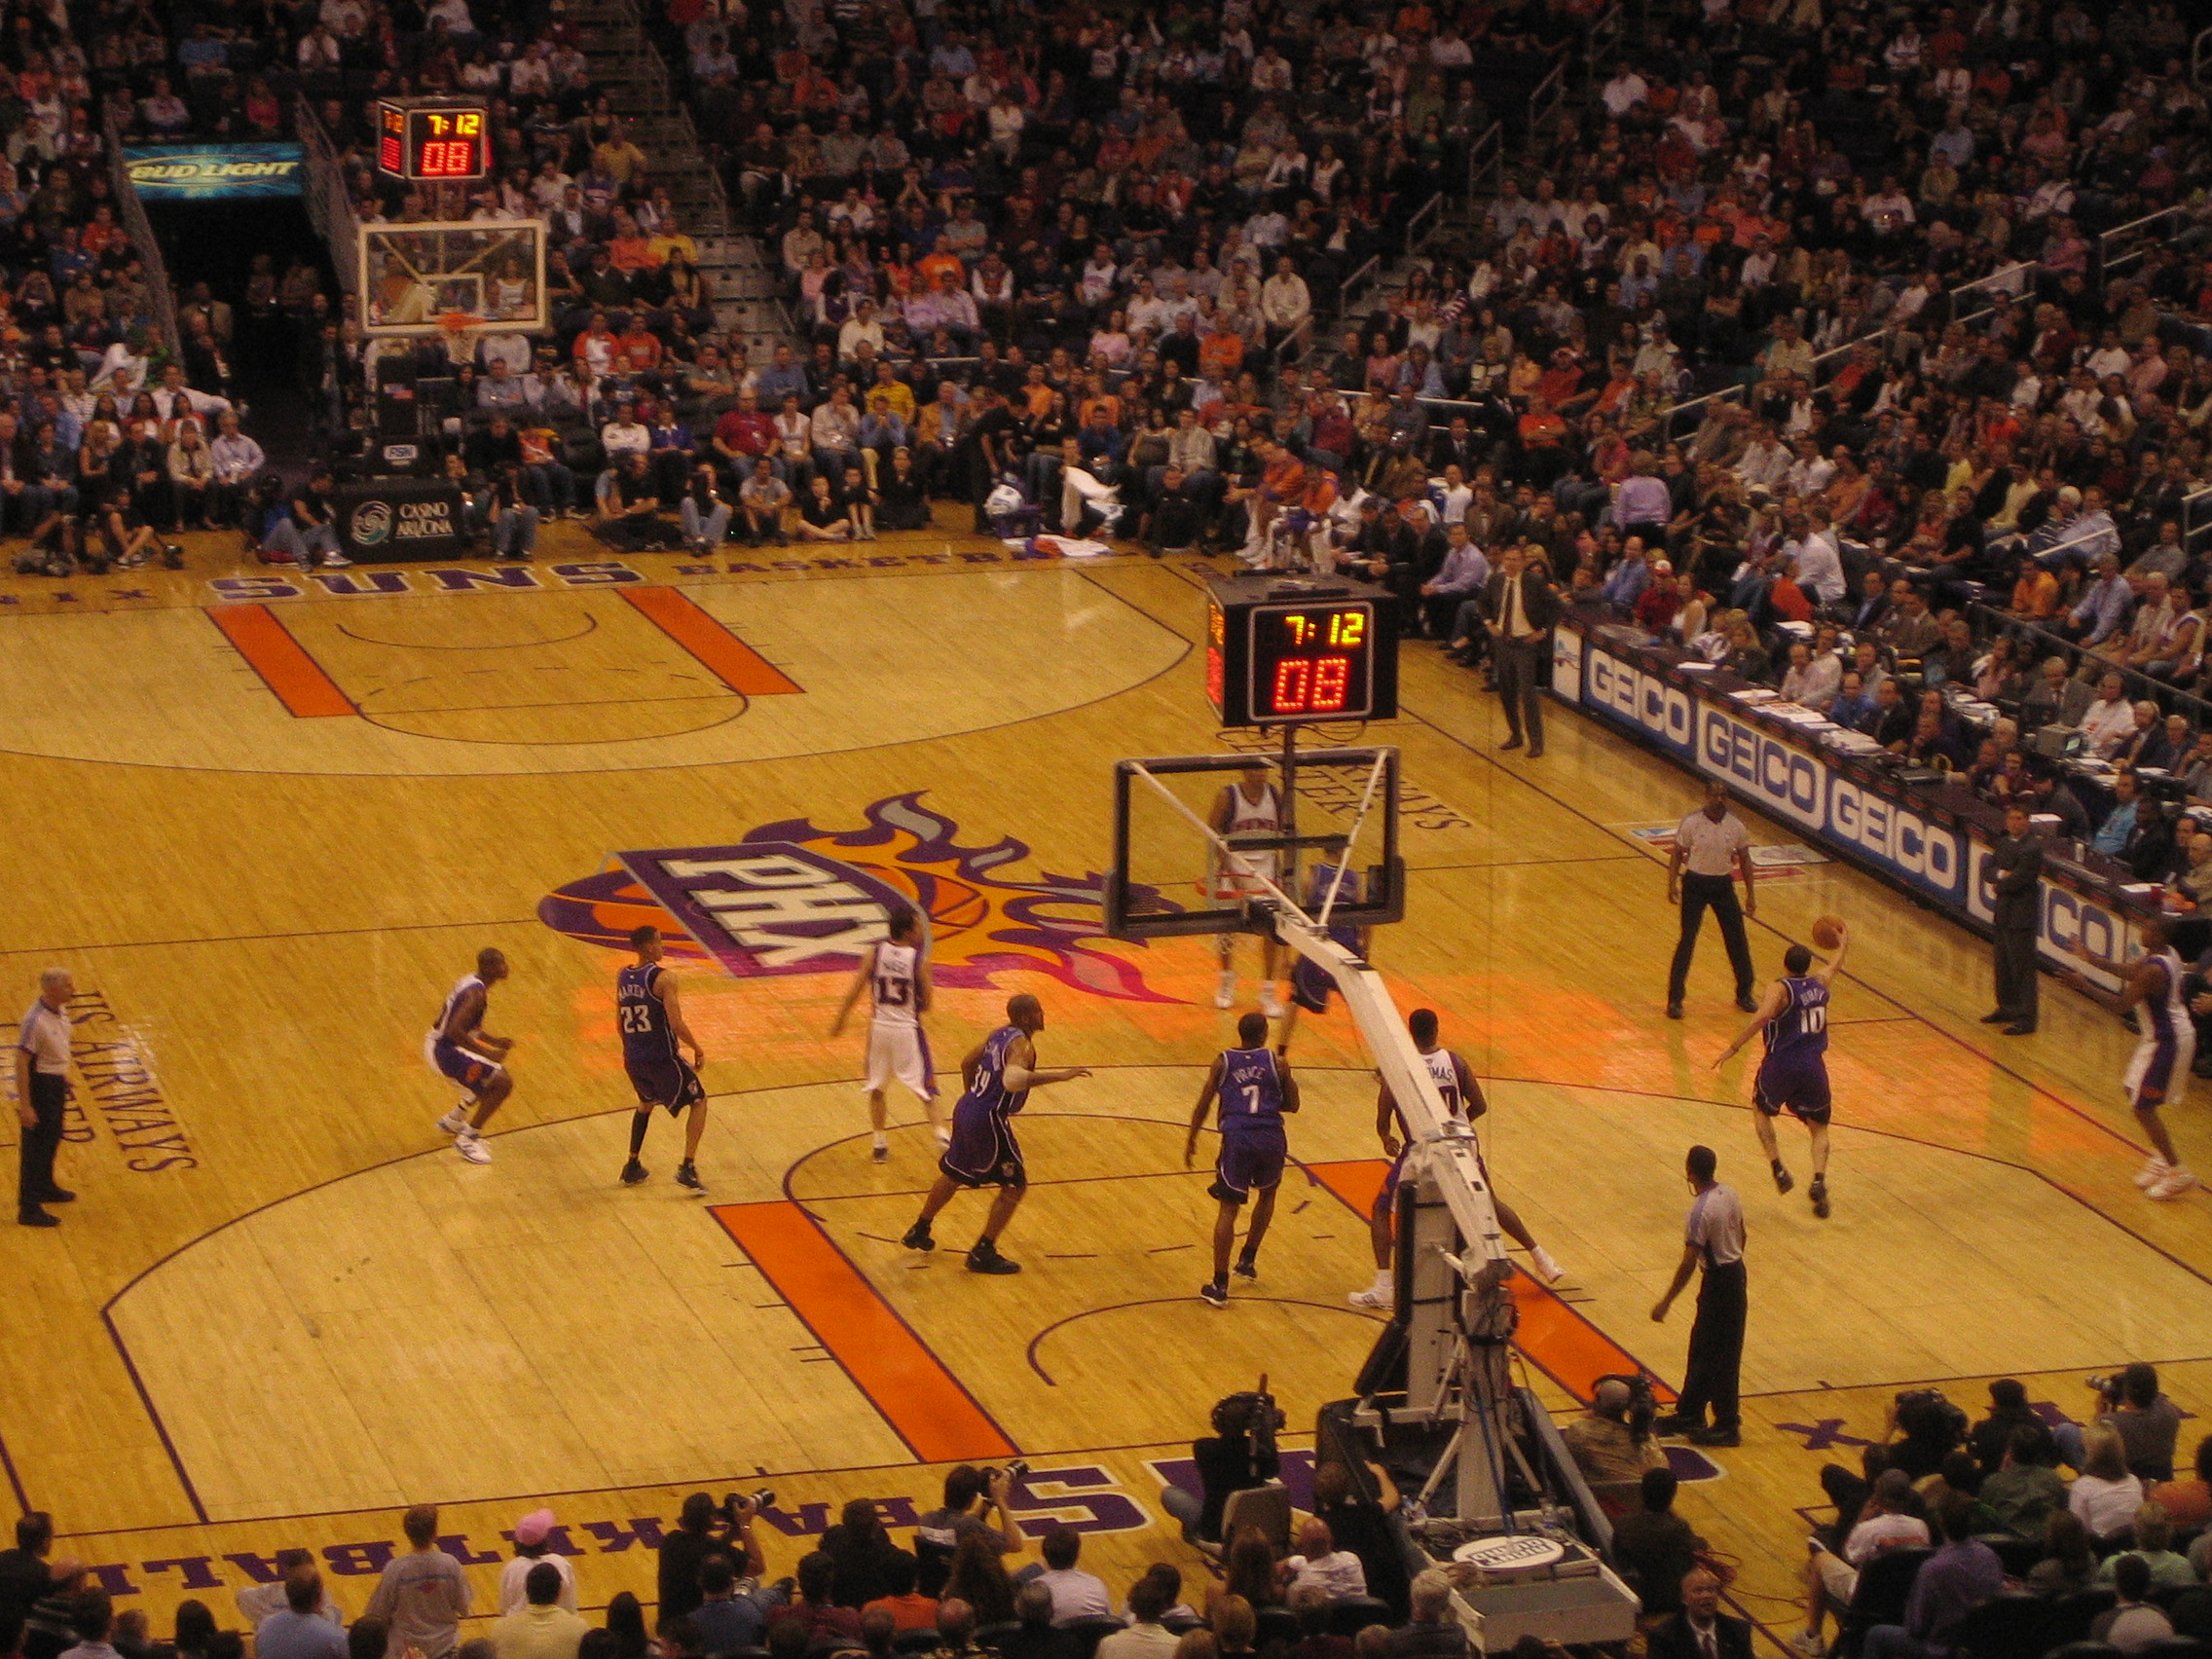 The Phoenix Suns in a game against the Sacramento Kings. Photo credit: John Knowles